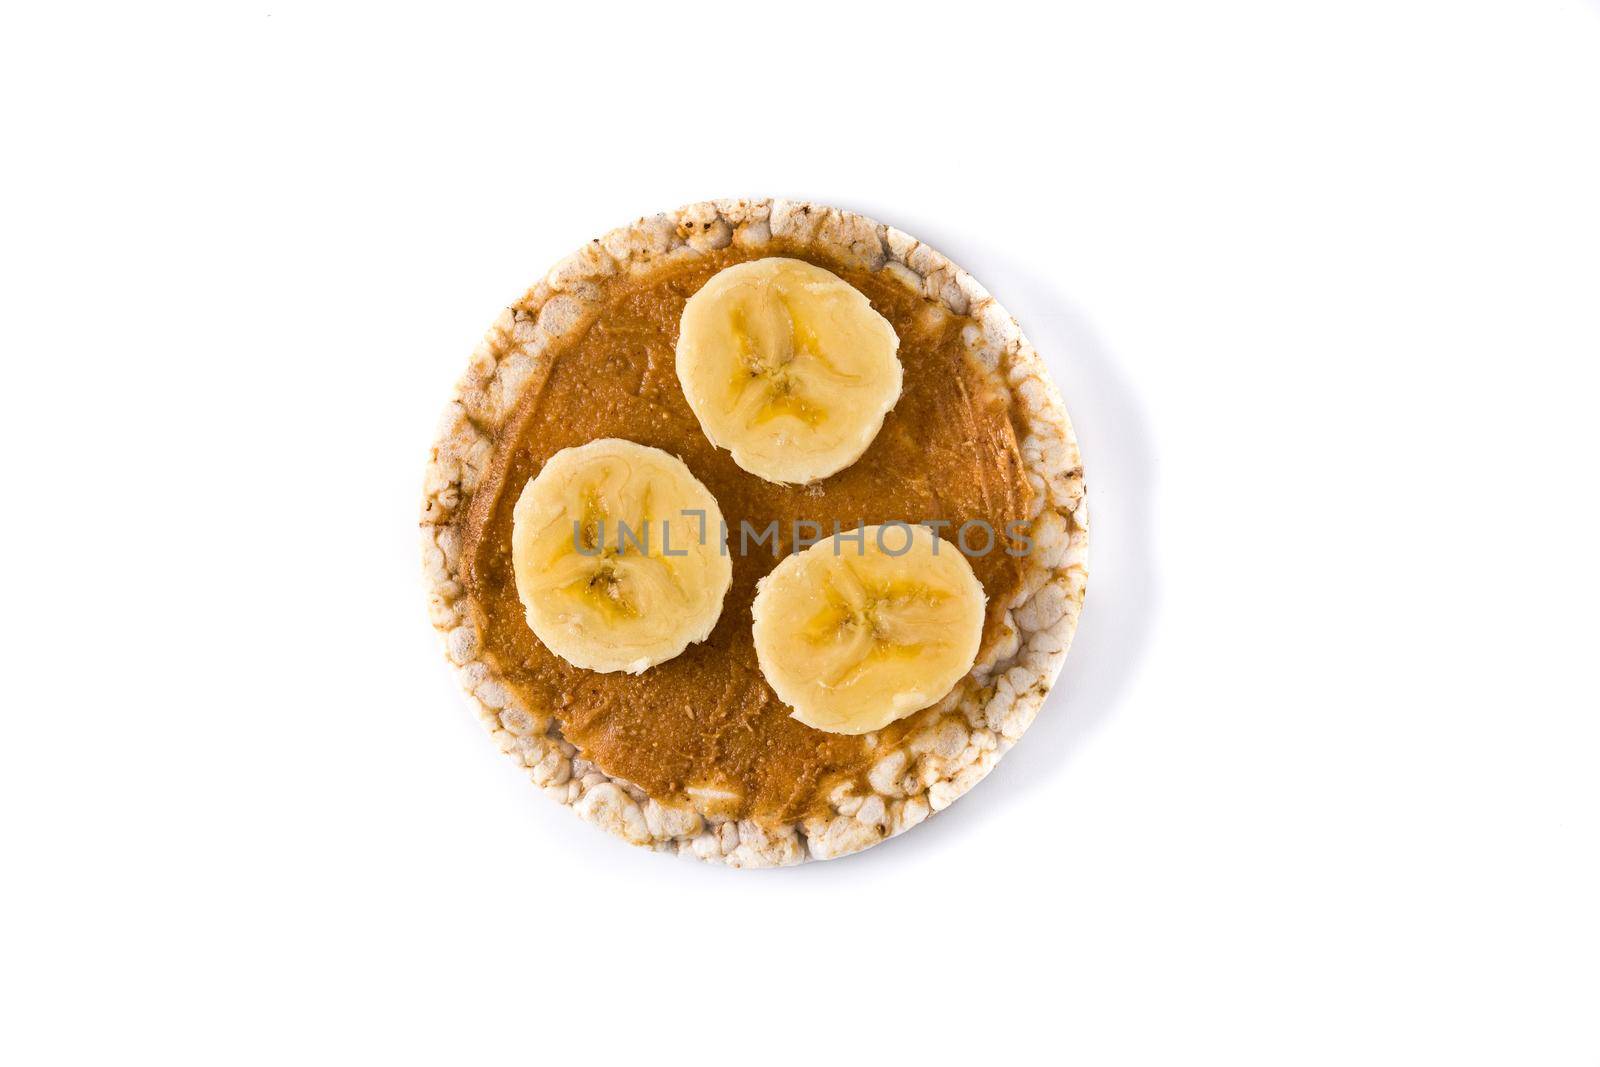 Puffed rice cake with banana and peanut butter isolated on white background